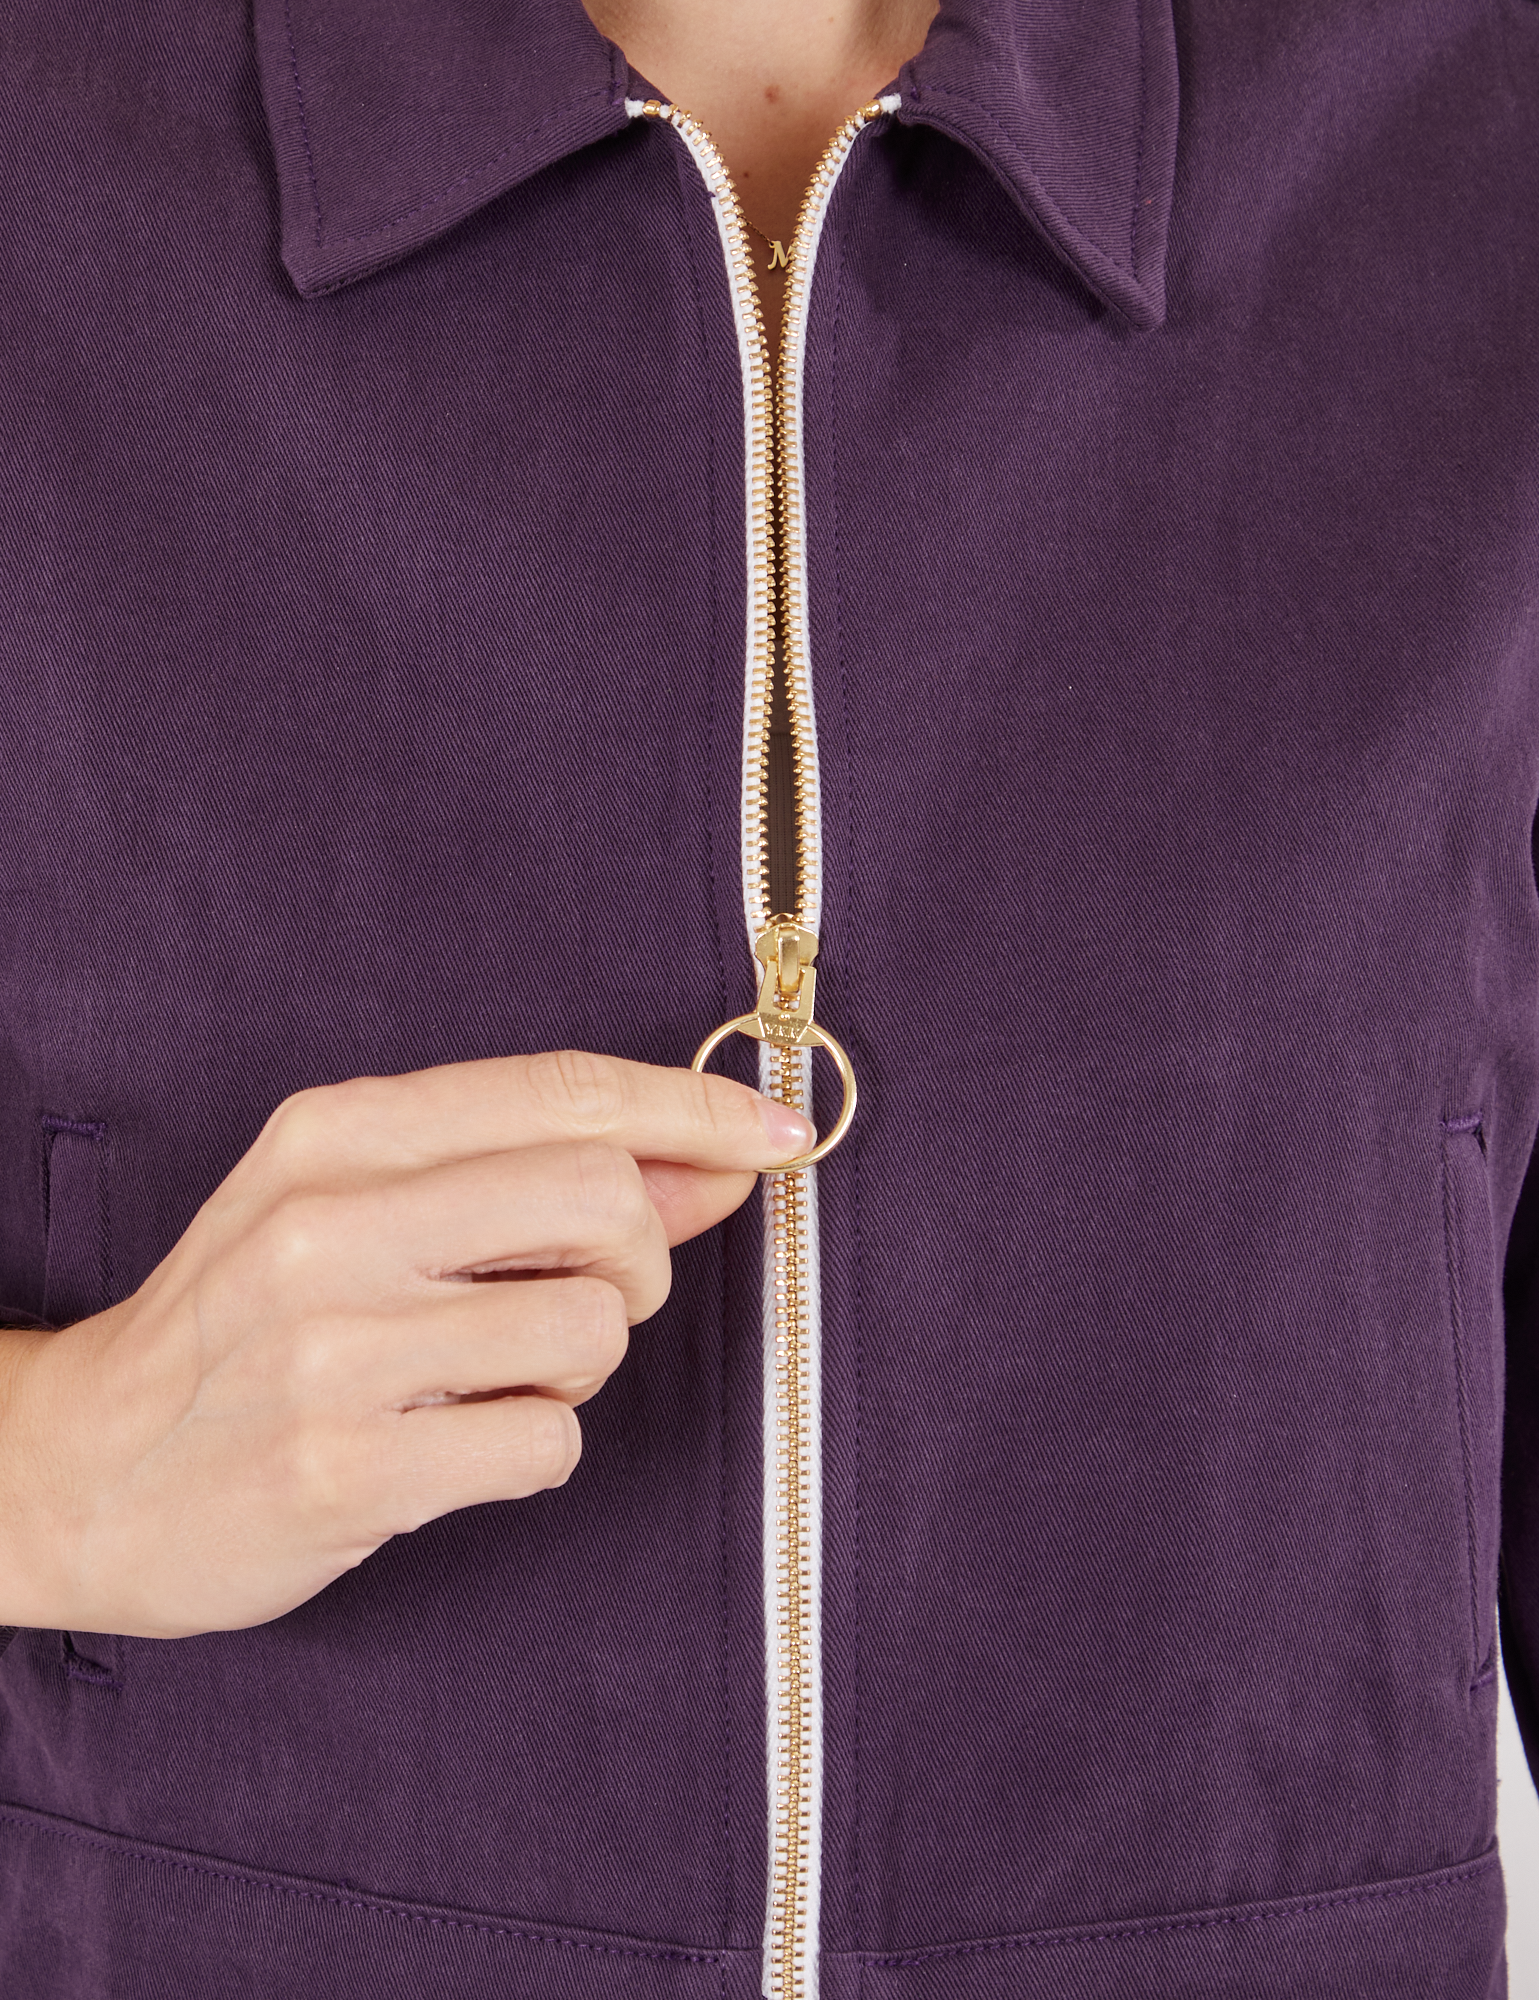 Ricky Jacket in Nebula Purple front close up. Madeline is holding onto the brass zipper pull